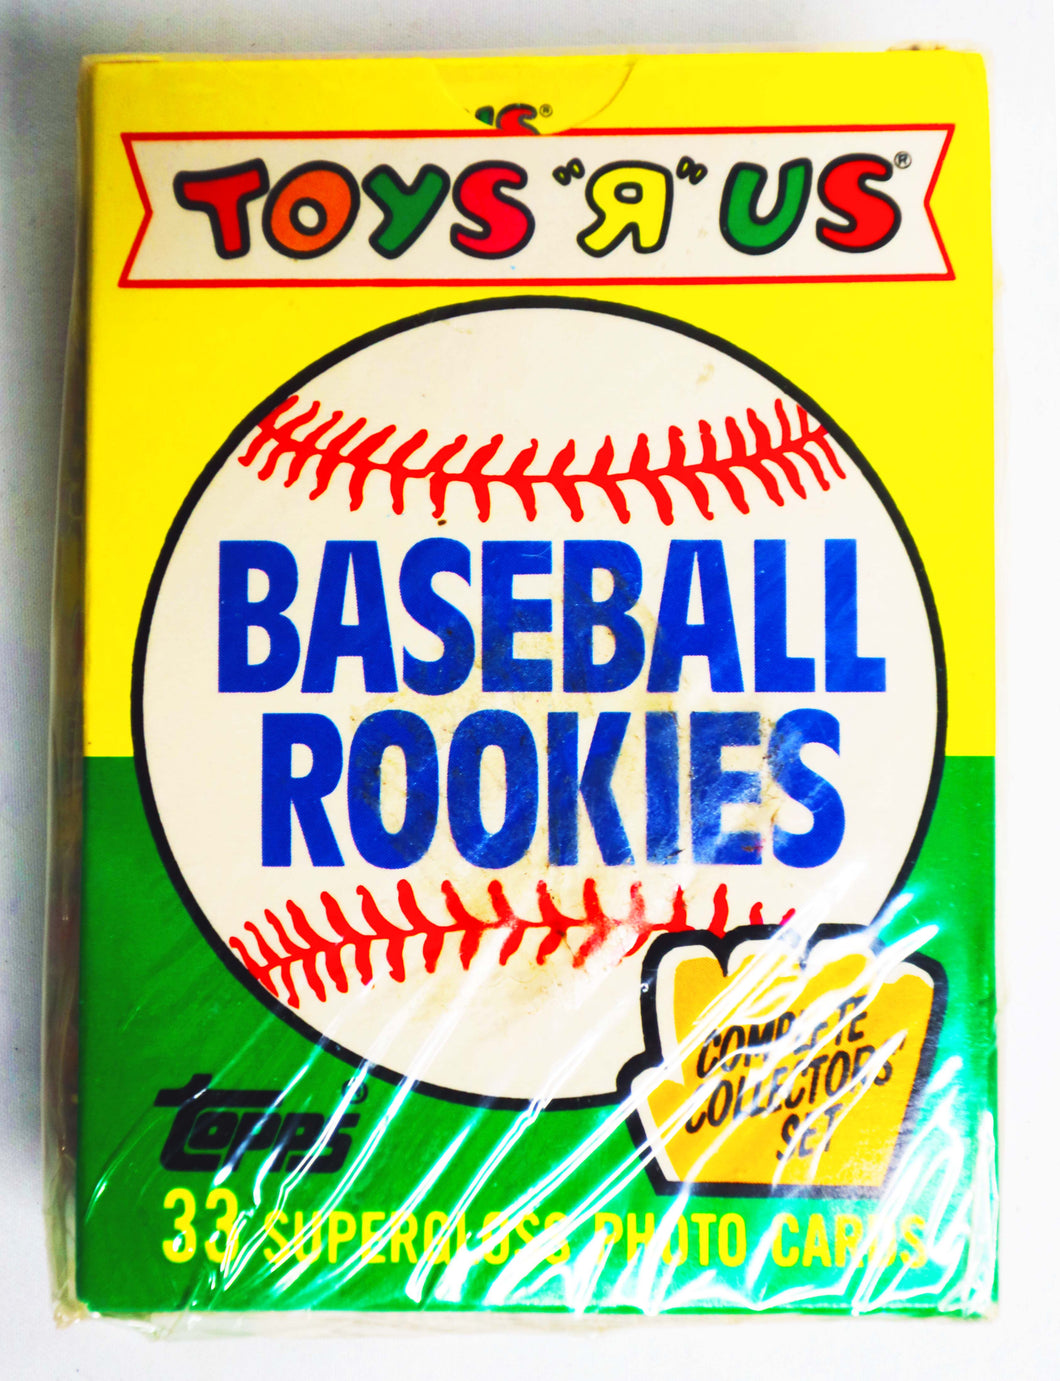 Trading Cards Sports - Supergloss Photo Cards - 1989 Baseball Rookie Card Set - 33 Card Set - Toys R Us Baseball Rookies- Complete Set - Full Factory Set